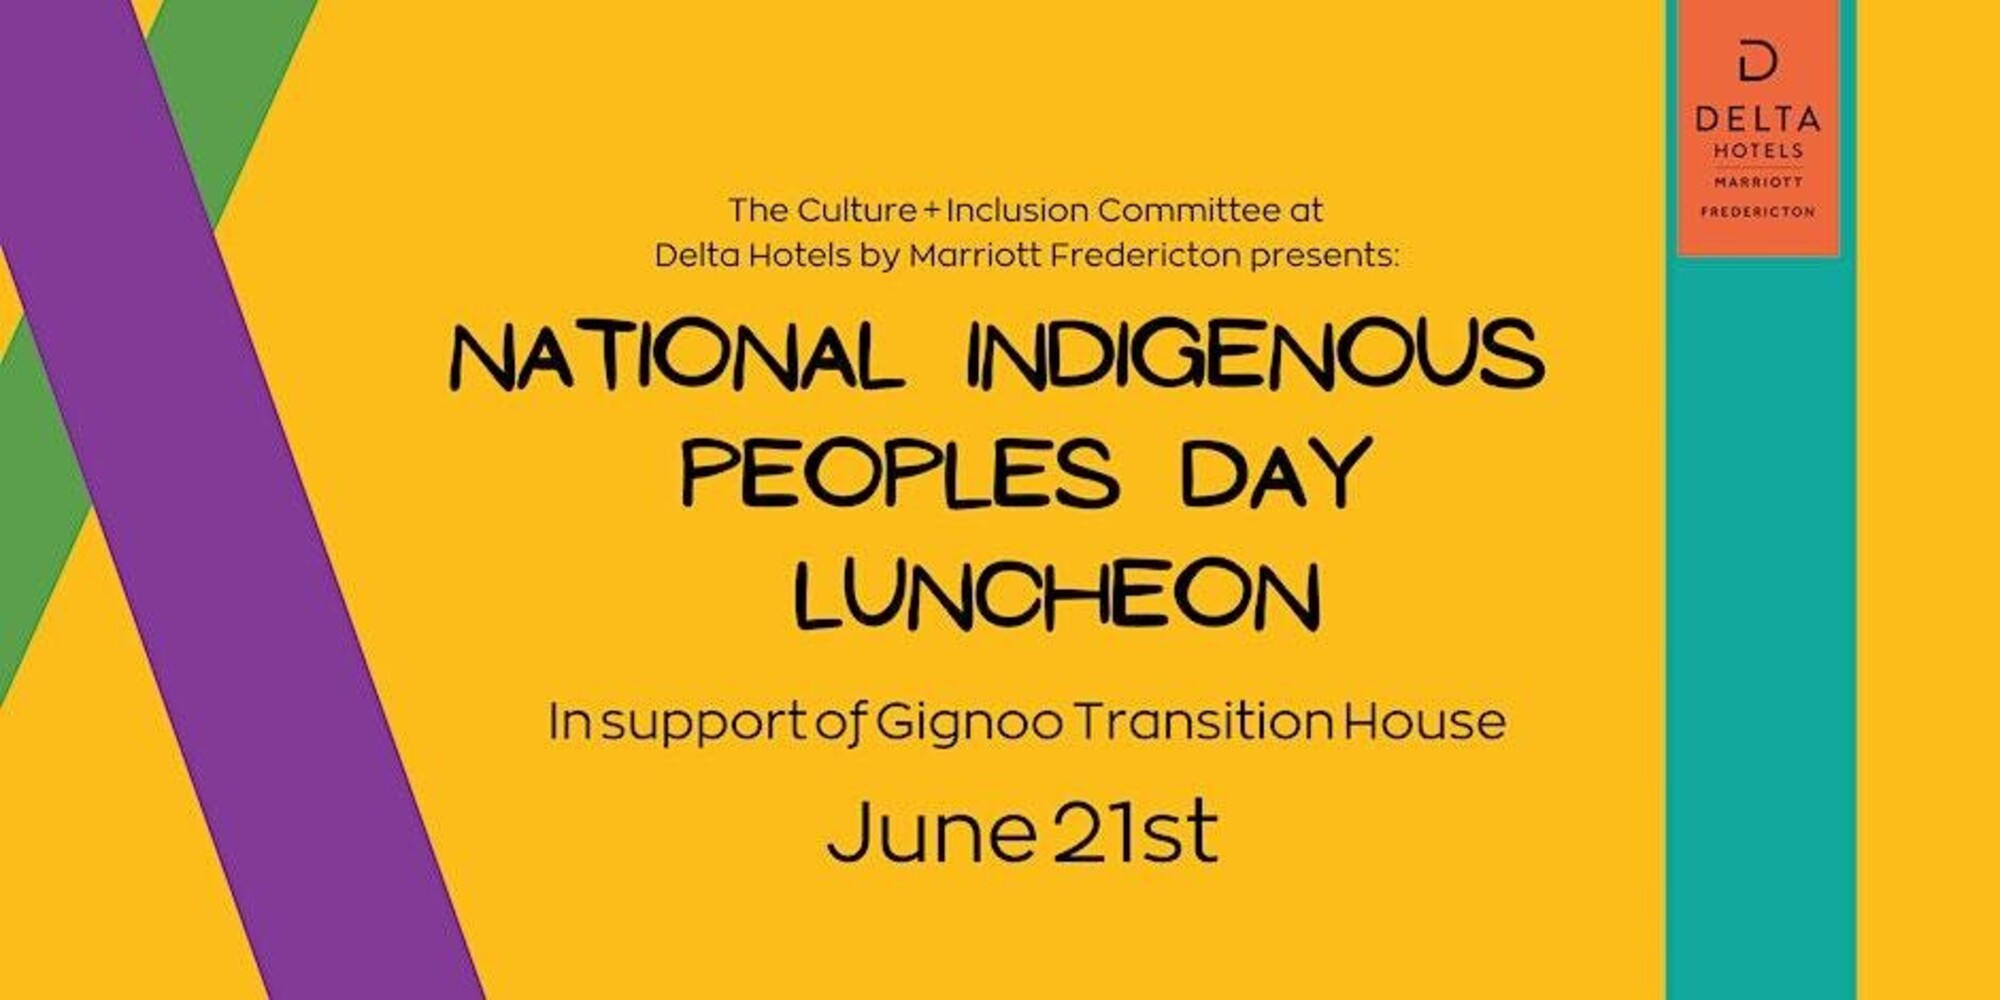 National Indigenous Peoples Day Luncheon